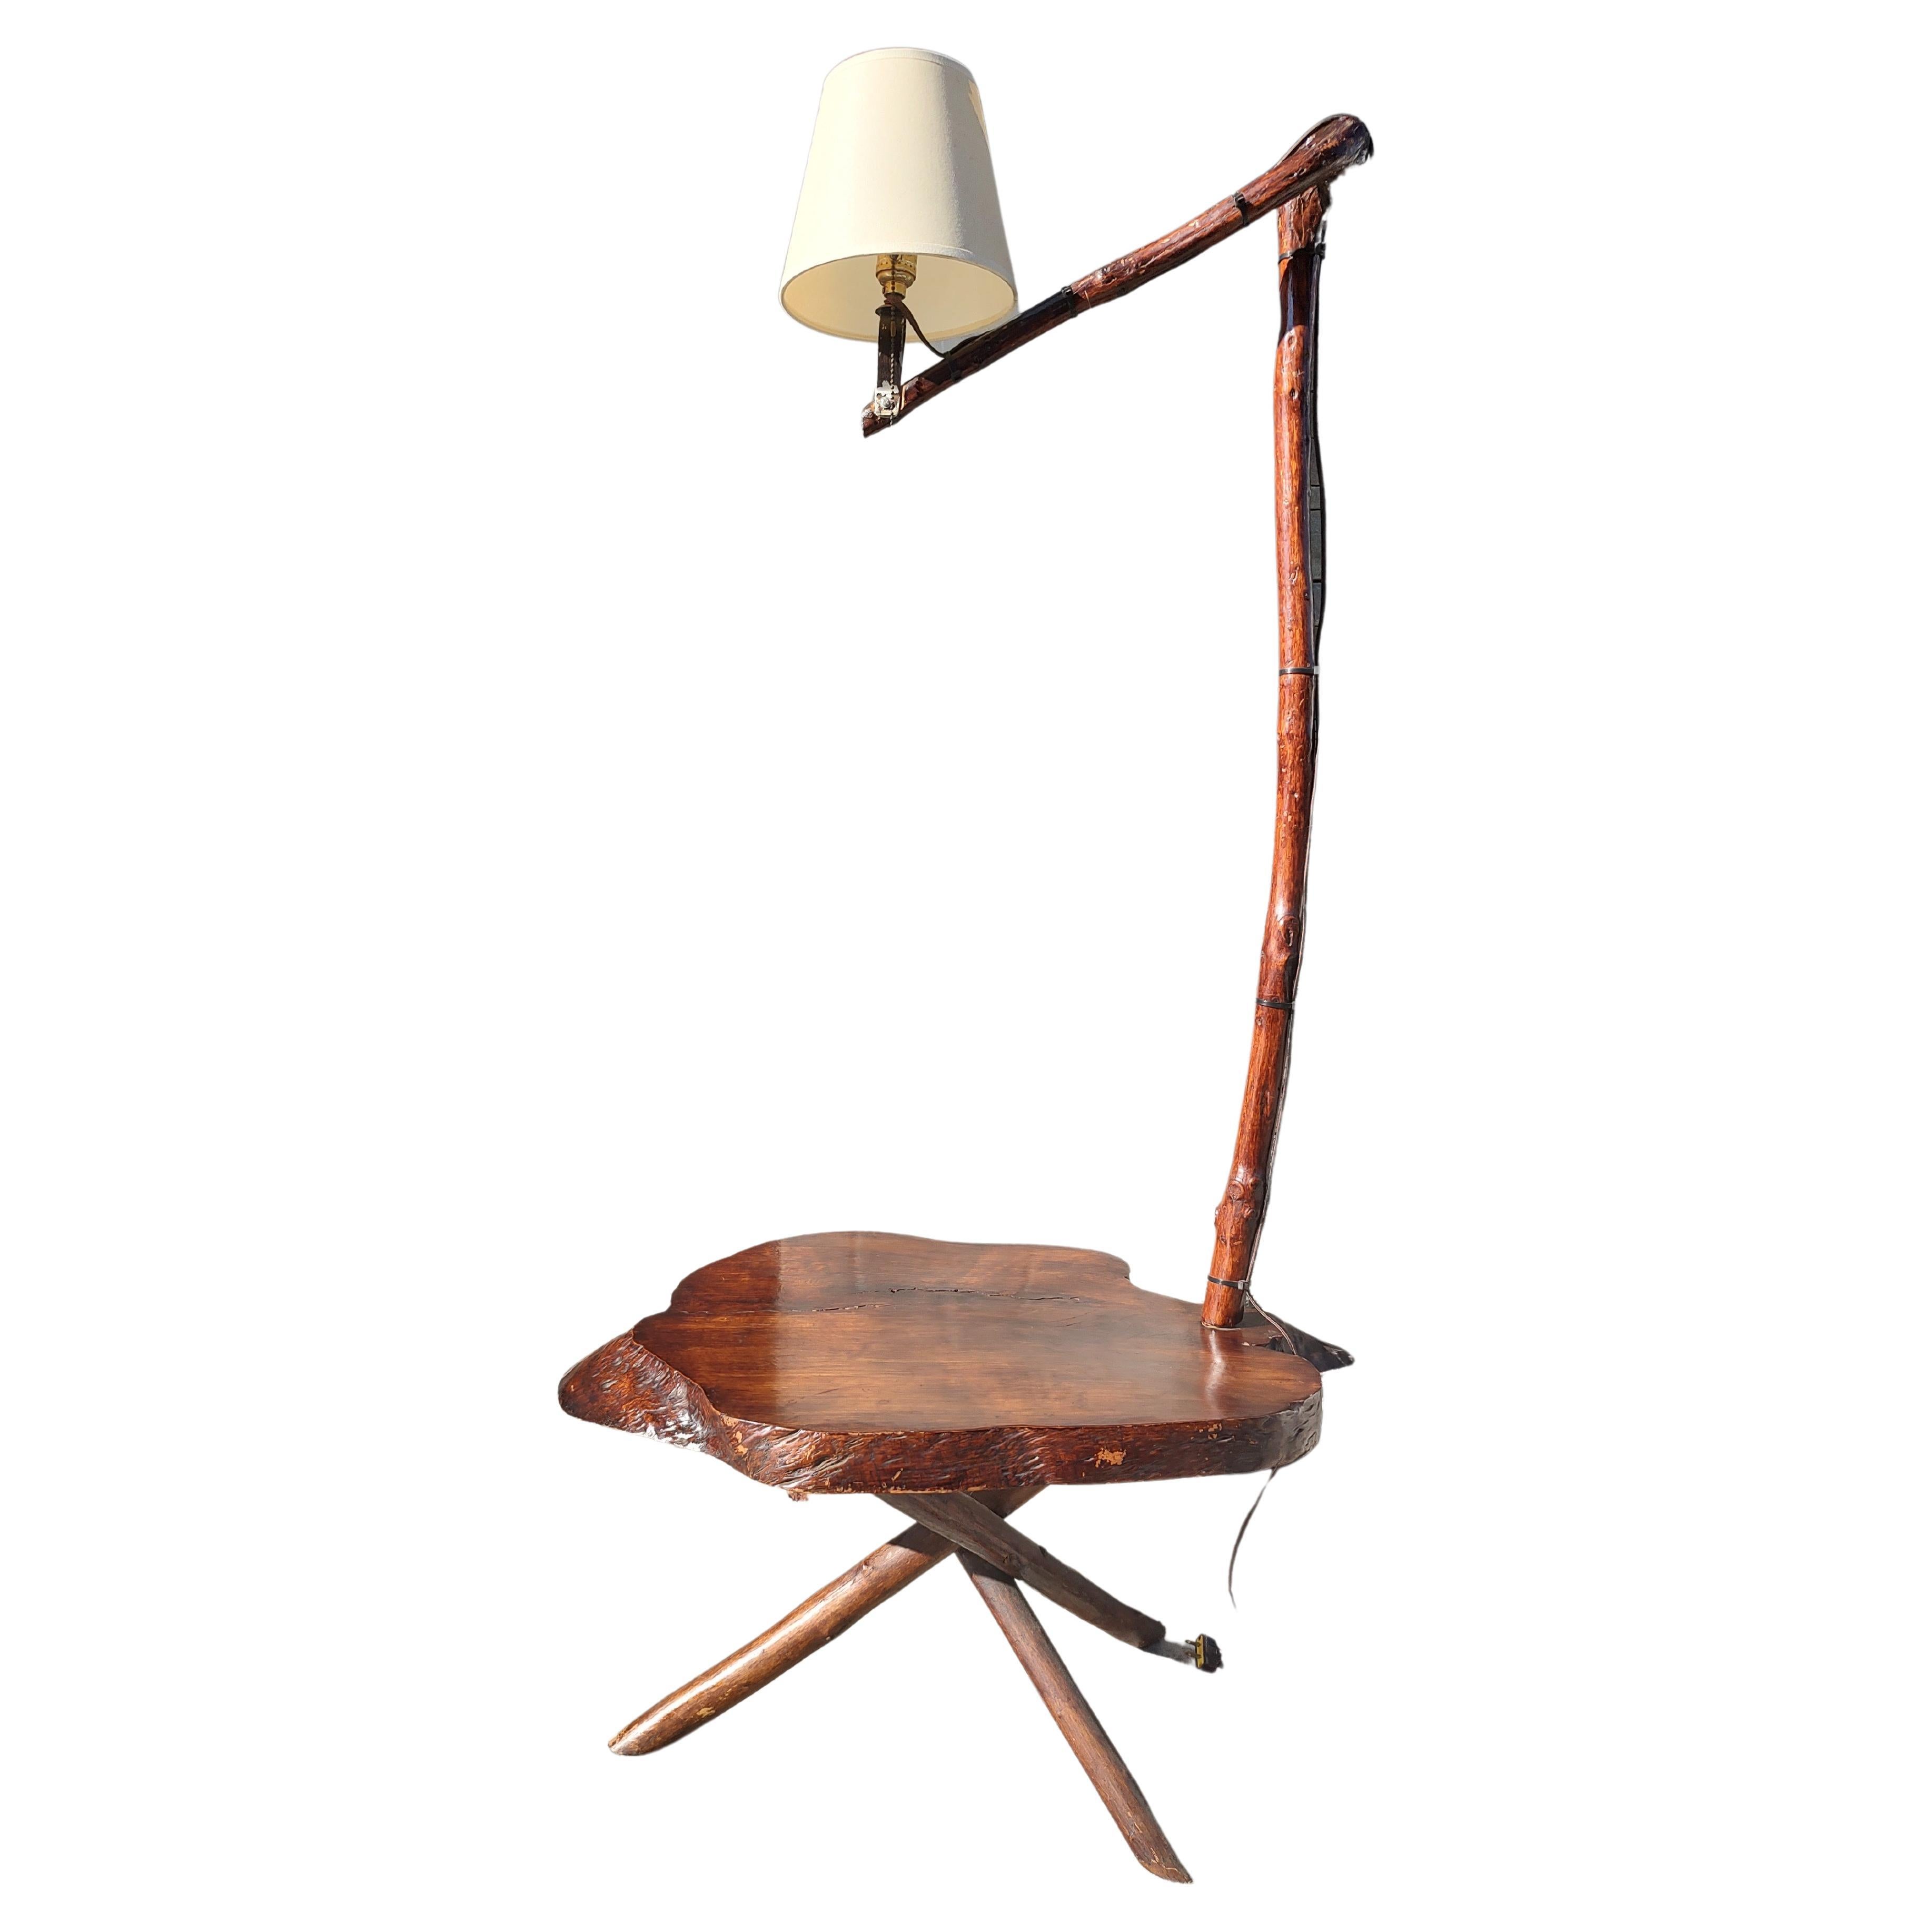 Mid-20th Century Adirondack Bent Twig Floor Lamp with Tri Leg Table Base For Sale